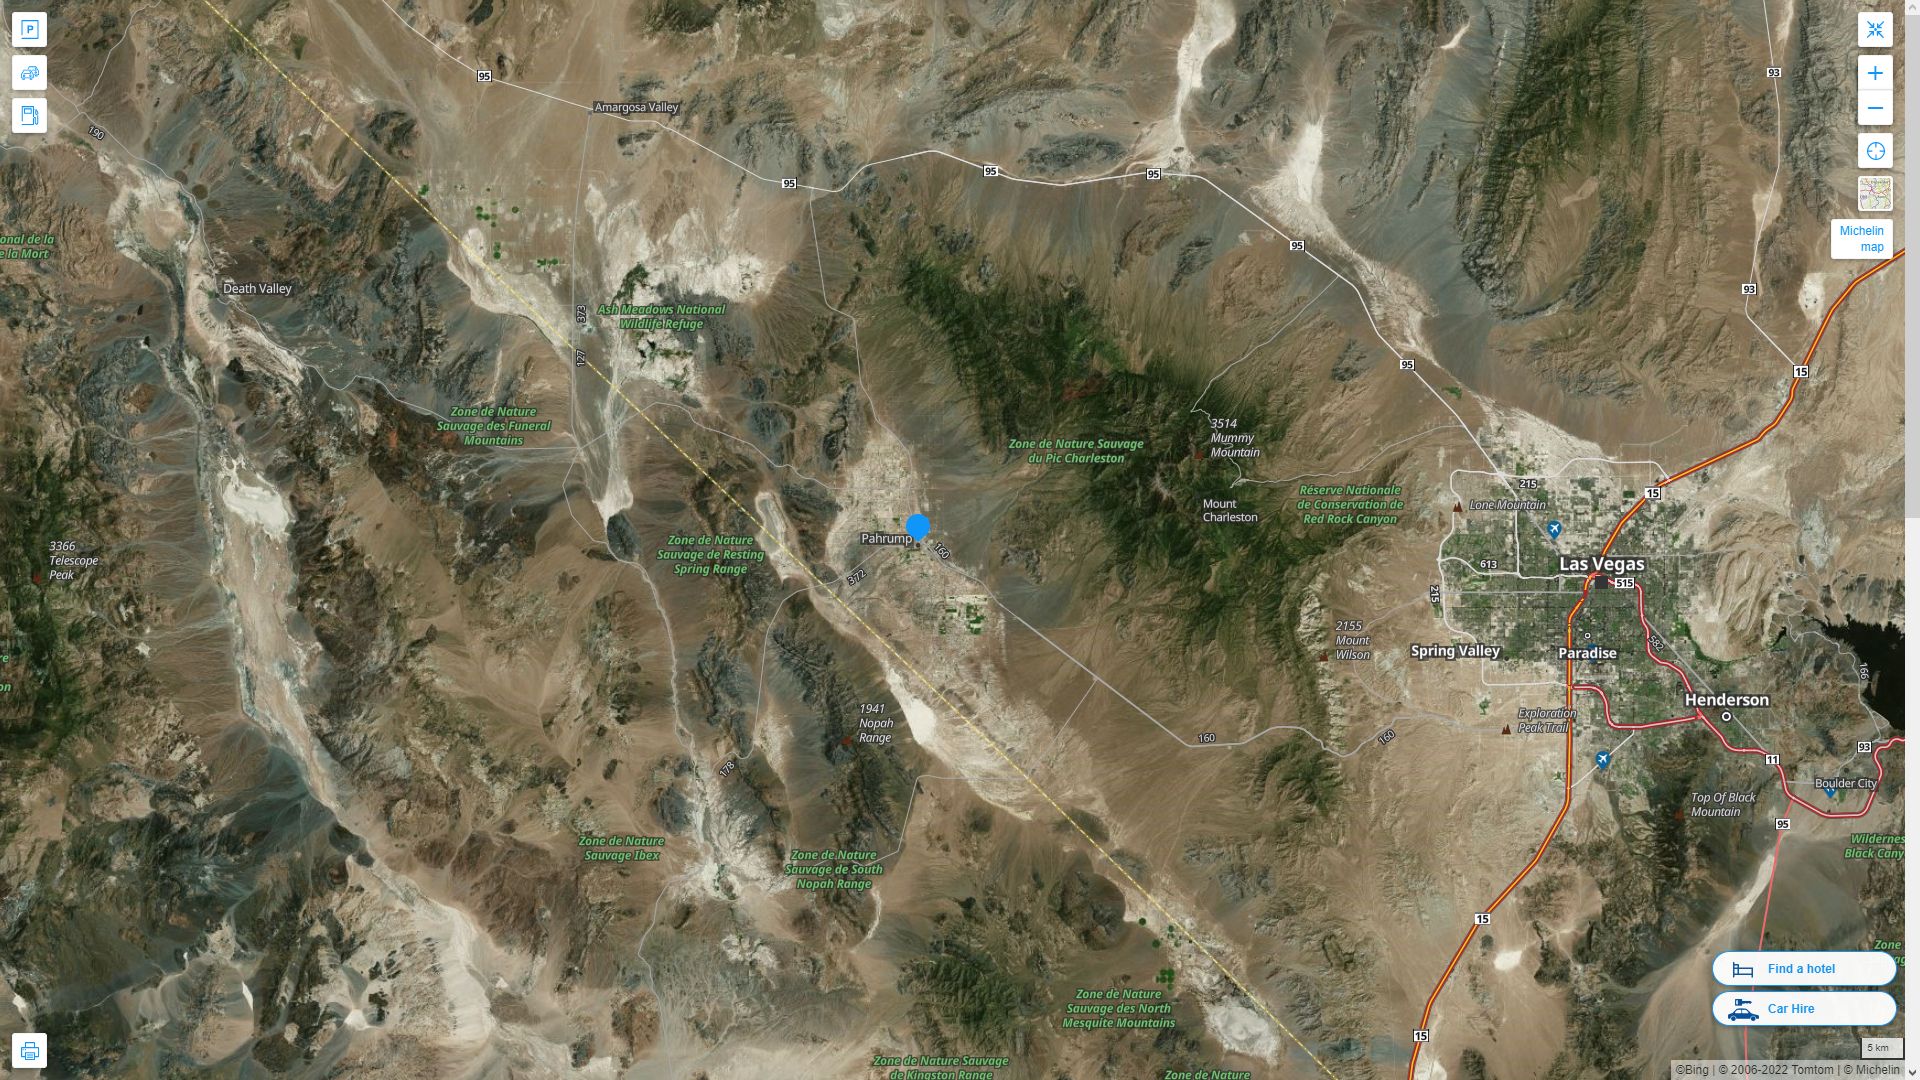 Pahrump Nevada Highway and Road Map with Satellite View